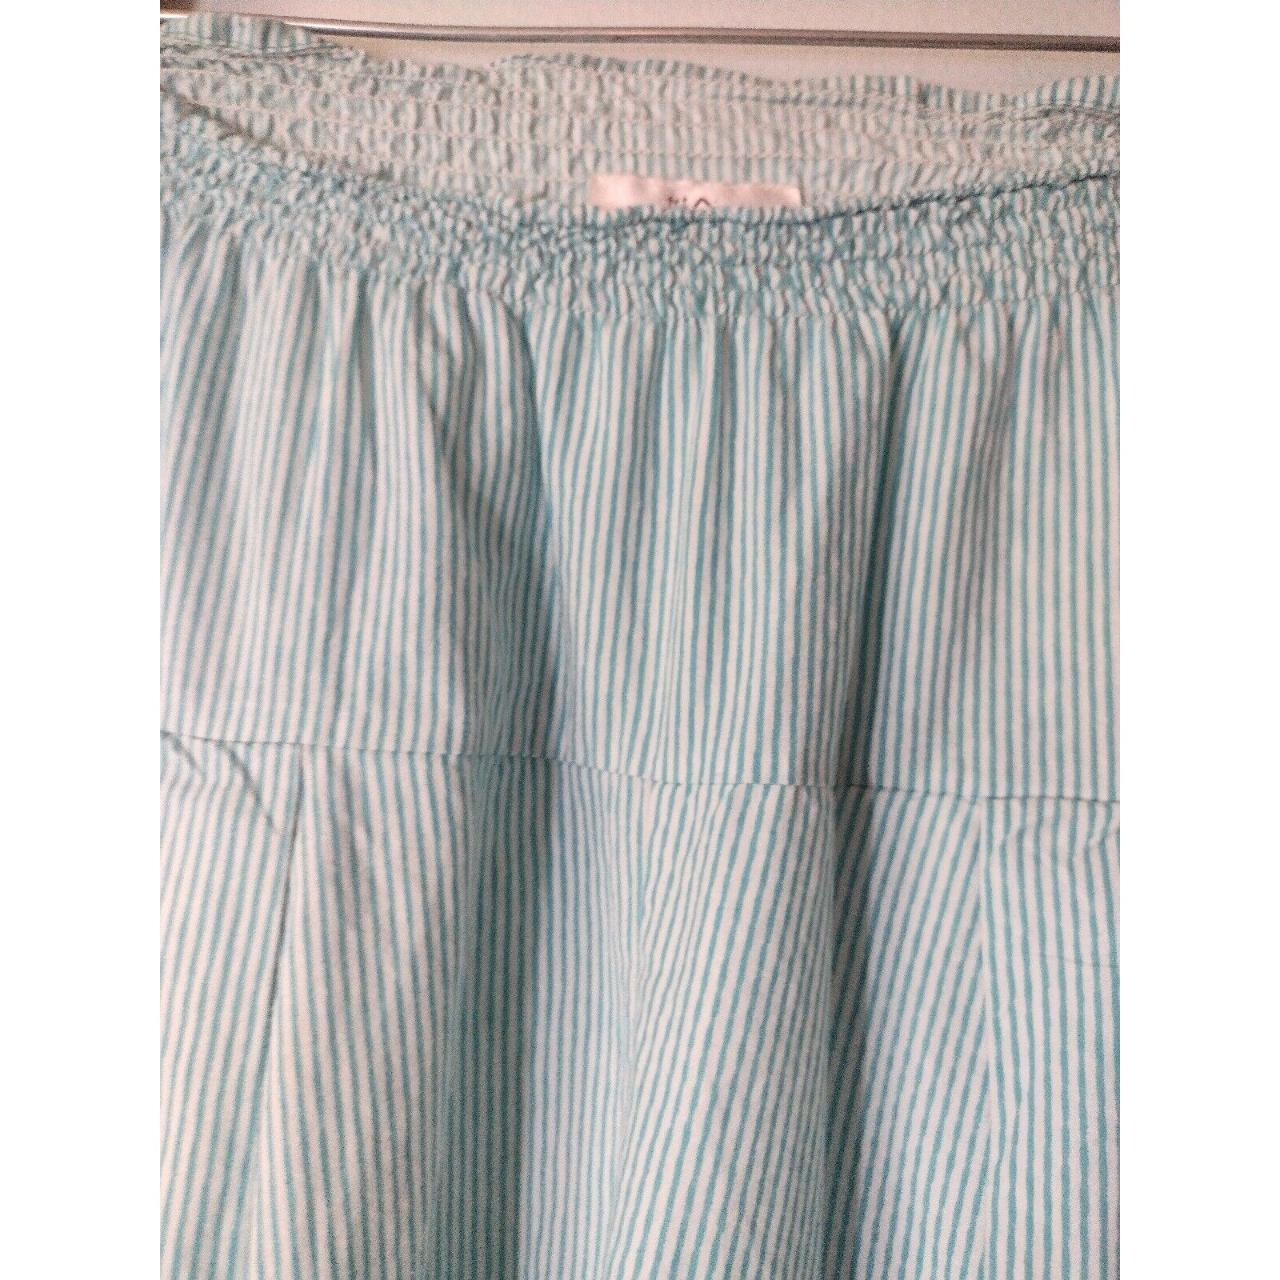 ANOKHI Women's White and Green Trousers (5)